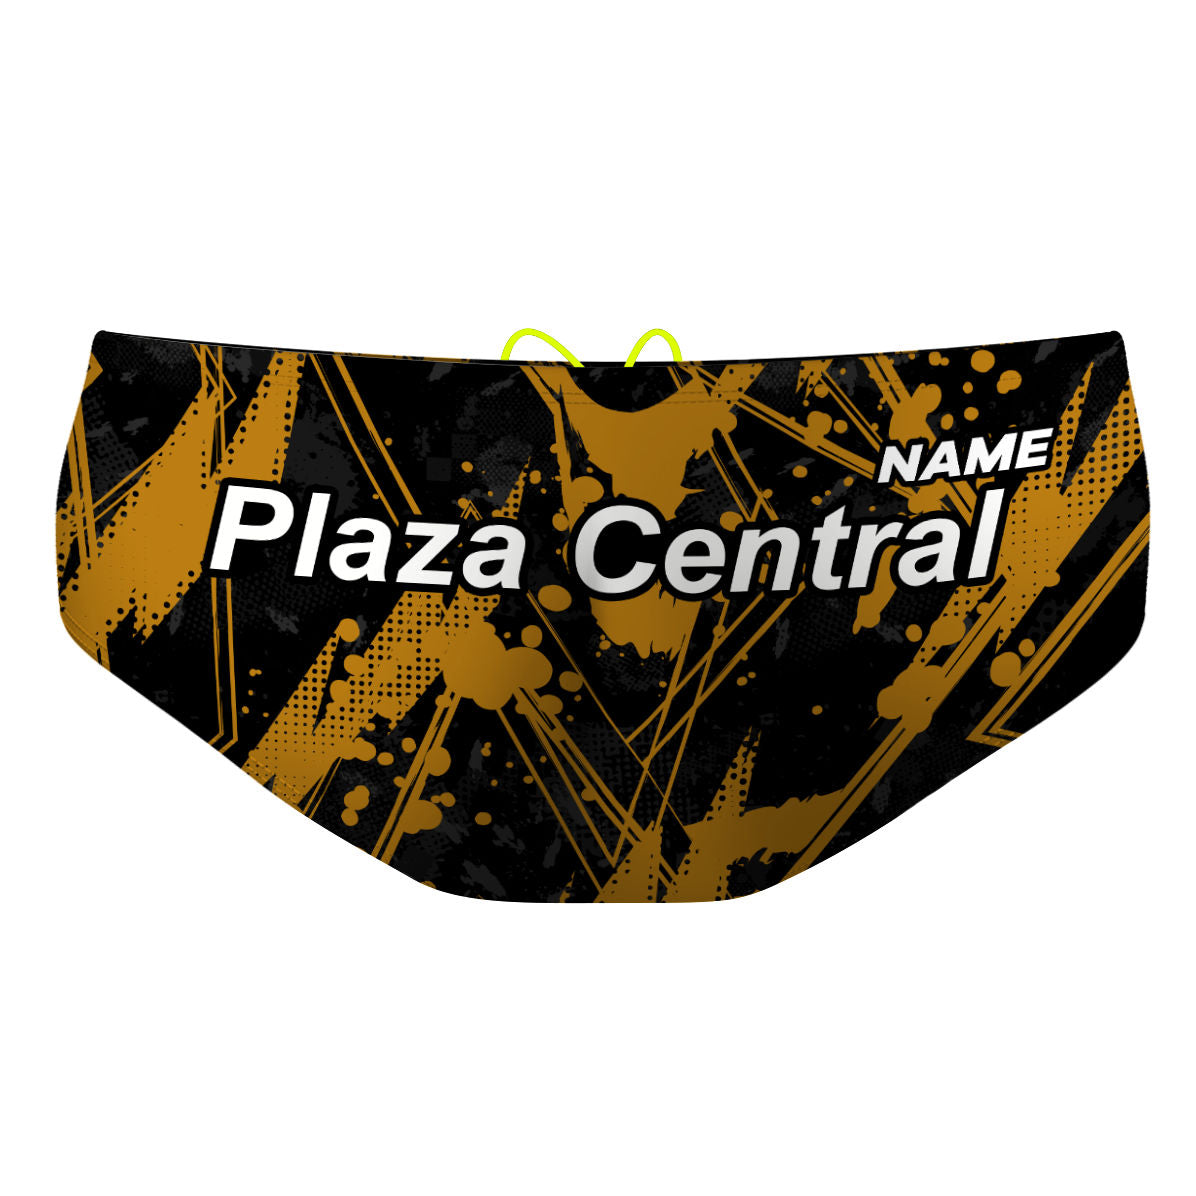 NV Plaza Central - Classic Brief Swimsuit